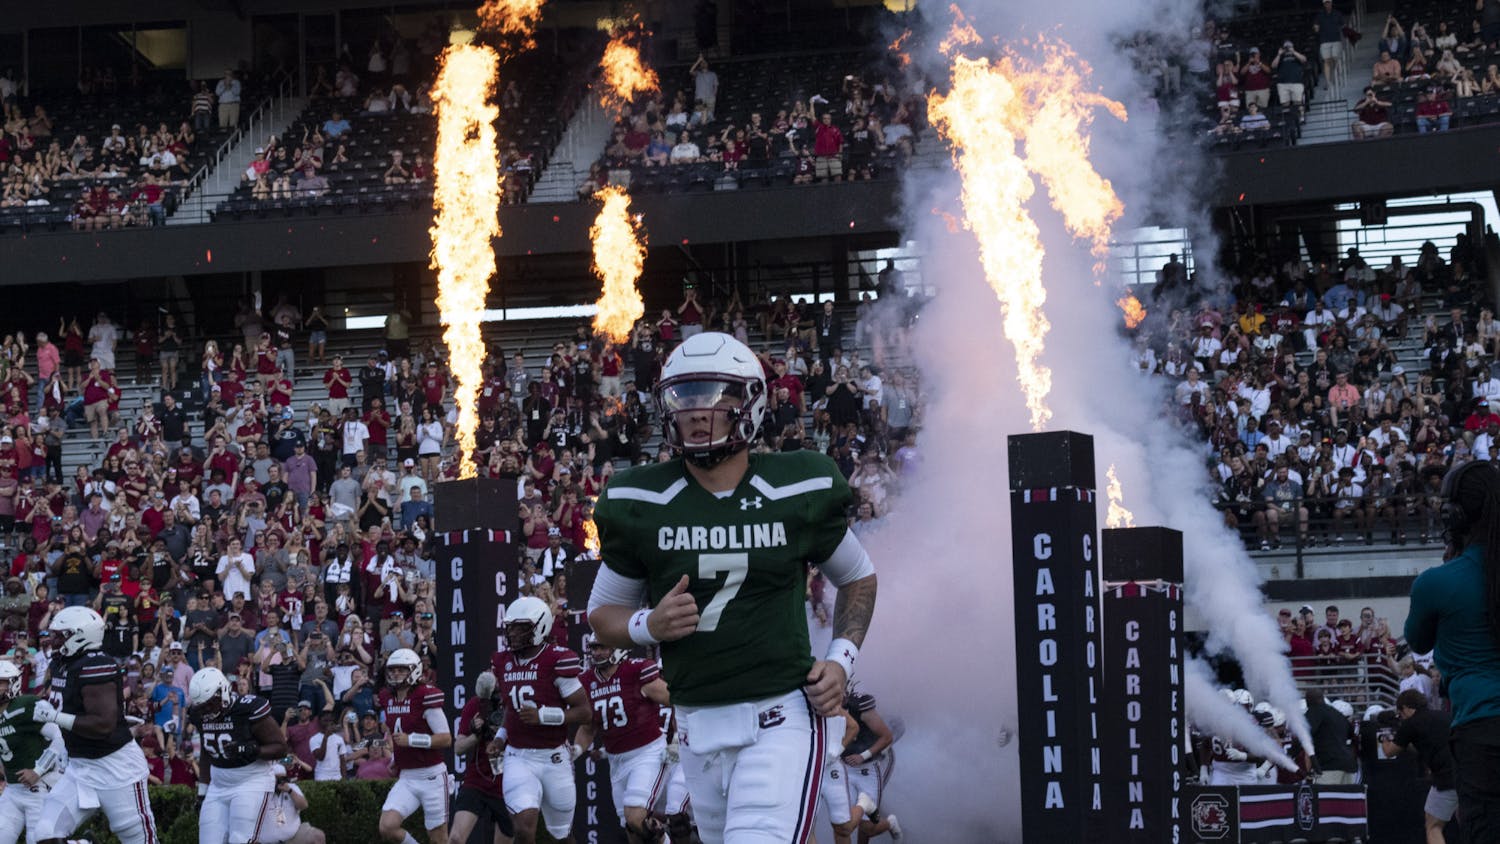 Redshirt senior quarterback Spencer Rattler leads the Gamecocks out to "2001: A Space Odyssey" at the annual Garnet &amp; Black Spring Game on April 15, 2023, at Williams-Brice Stadium. Rattler would throw one touchdown for the Black Team in his two quarters of play.&nbsp;